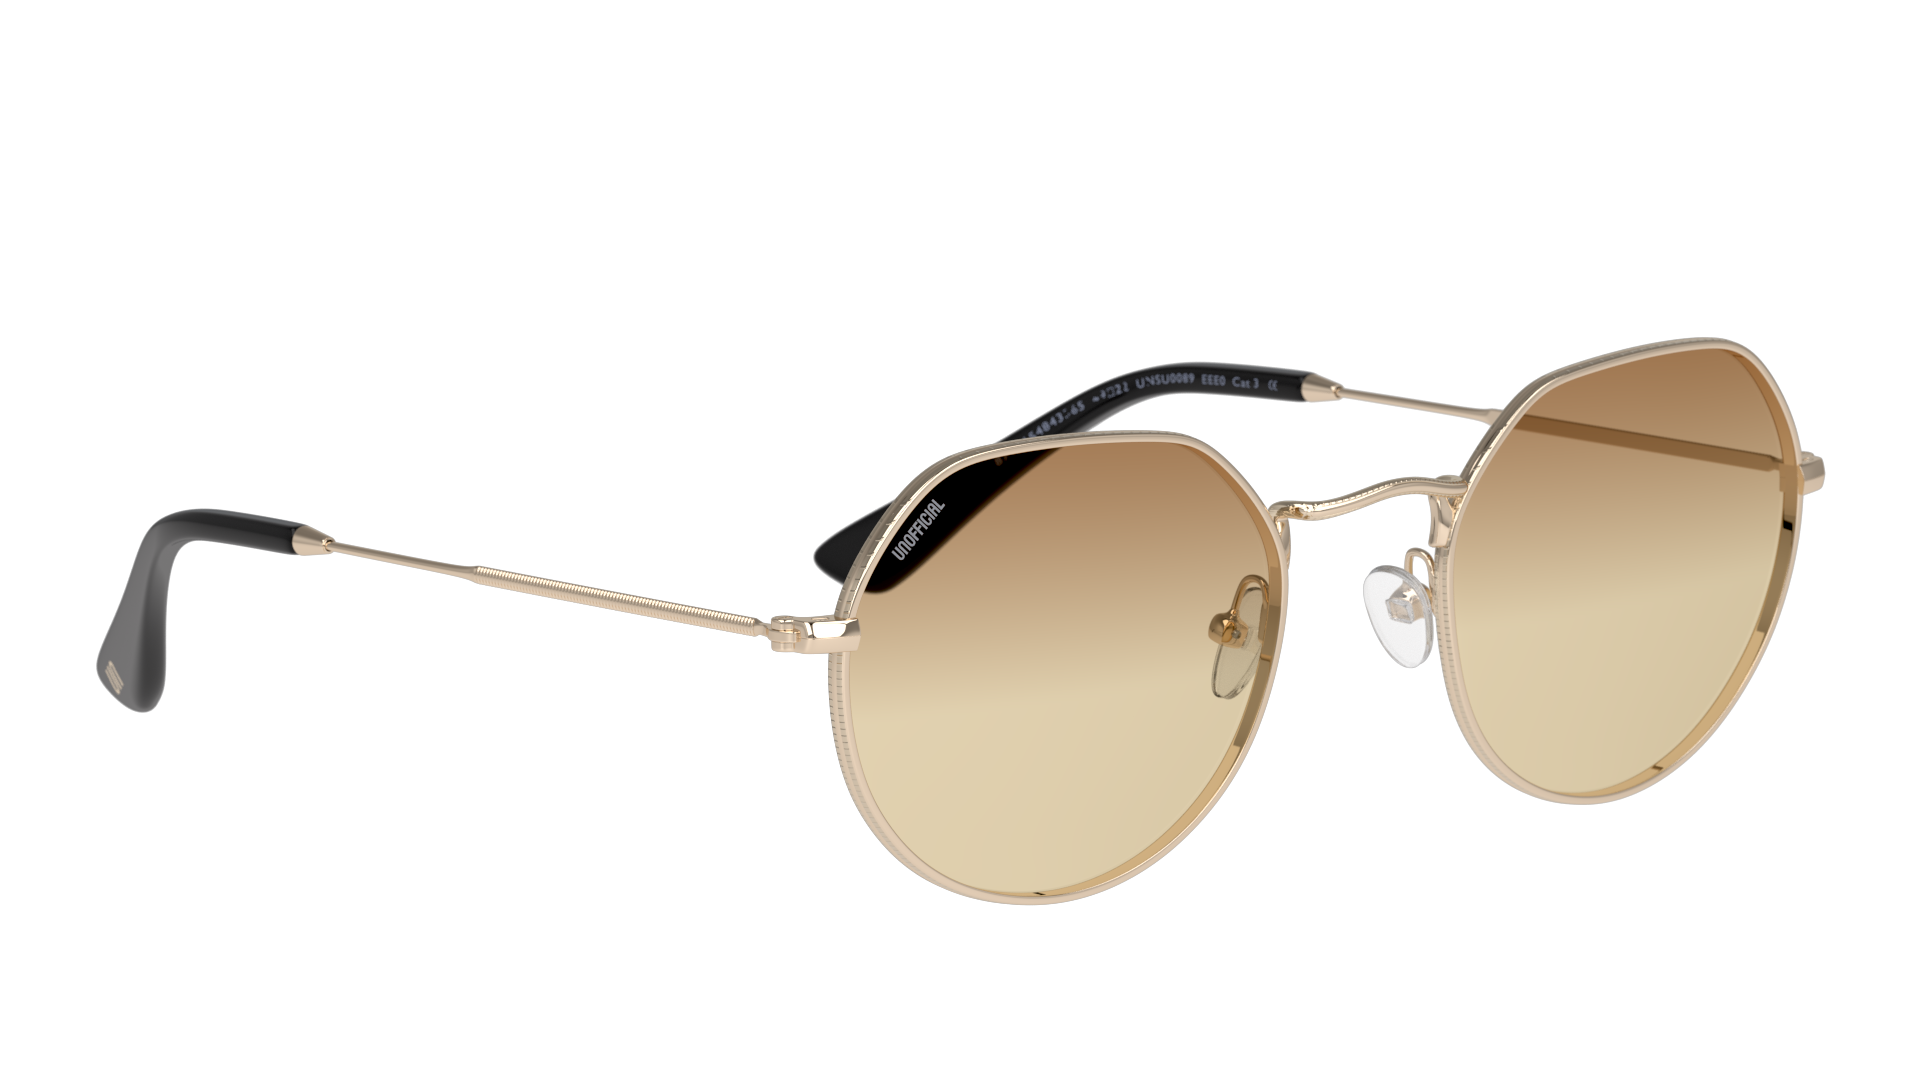 Angle_Right01 Unofficial UNSU0103 (DDN0) Sunglasses Brown / Gold